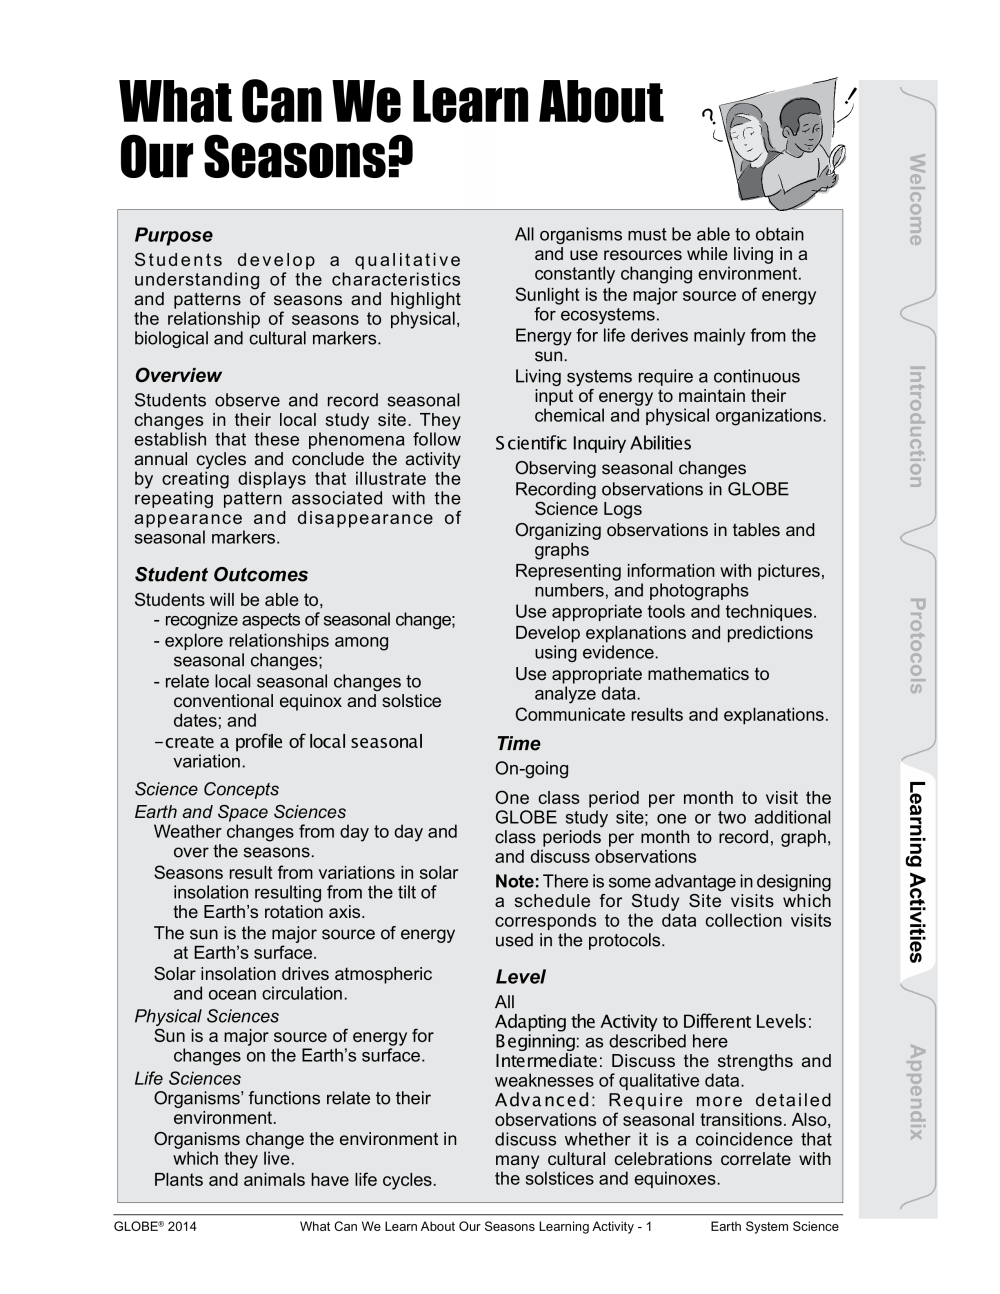 Learning Activities preview for S1- What Can We Learn About Our Seasons